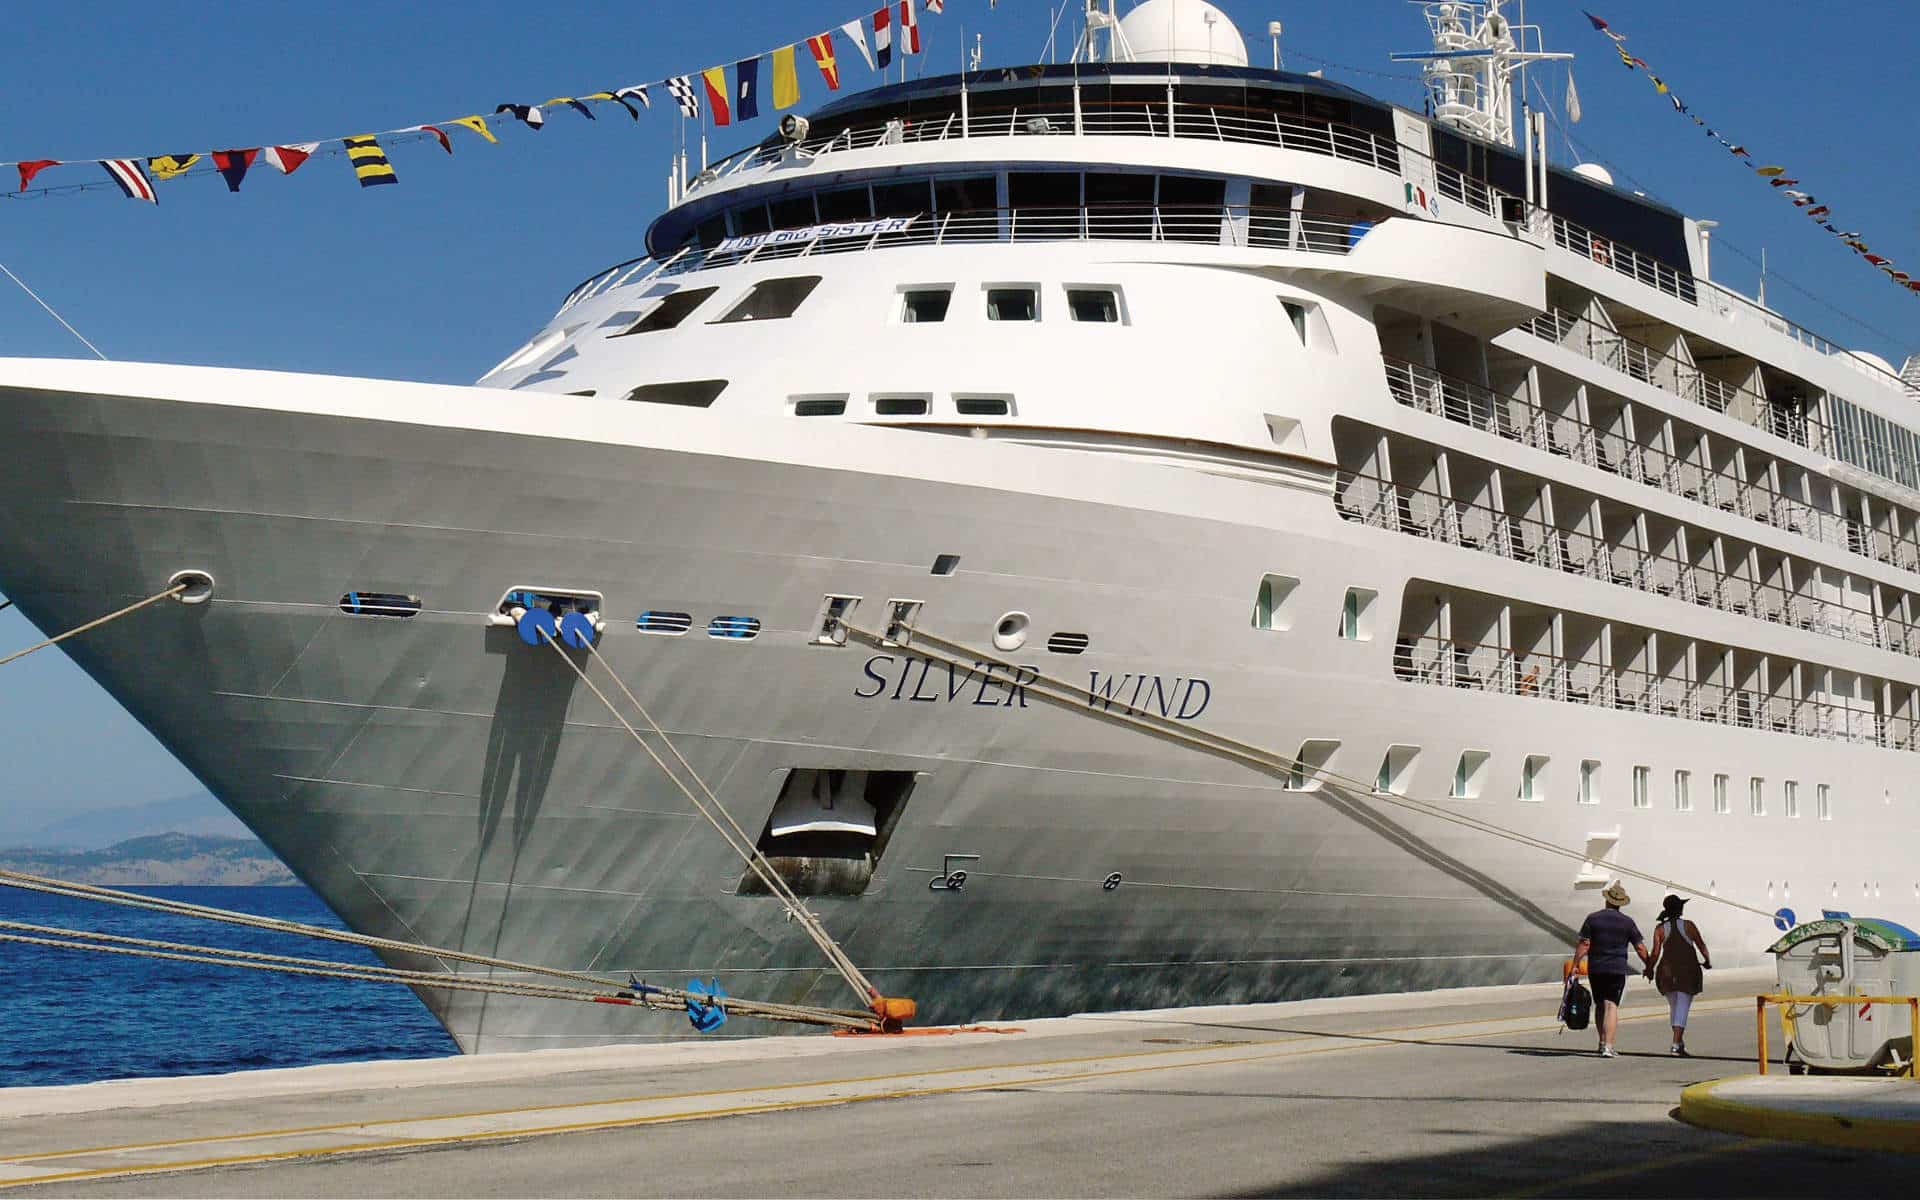 The Silver Wind cruise ship alingside in Kotor, Montenegro.